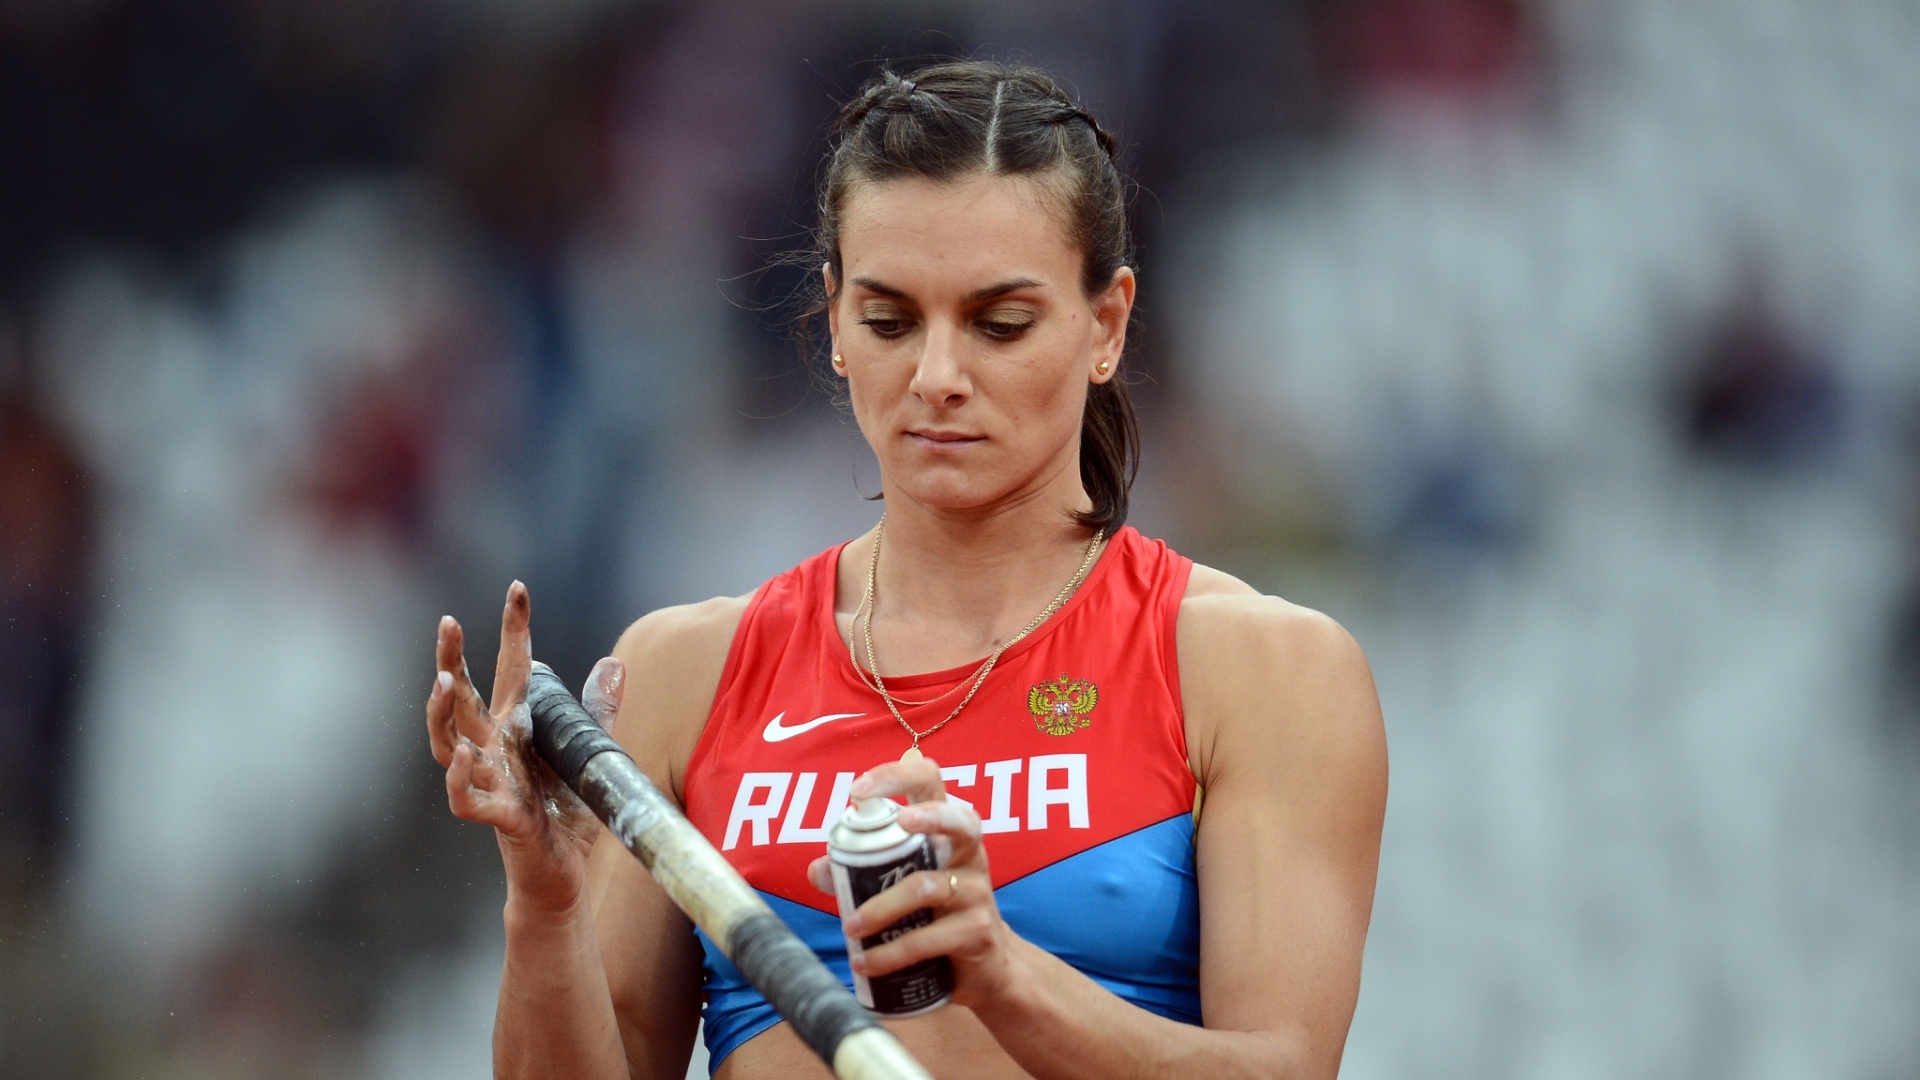 Isinbayeva wants to “prove Russia can be trusted”